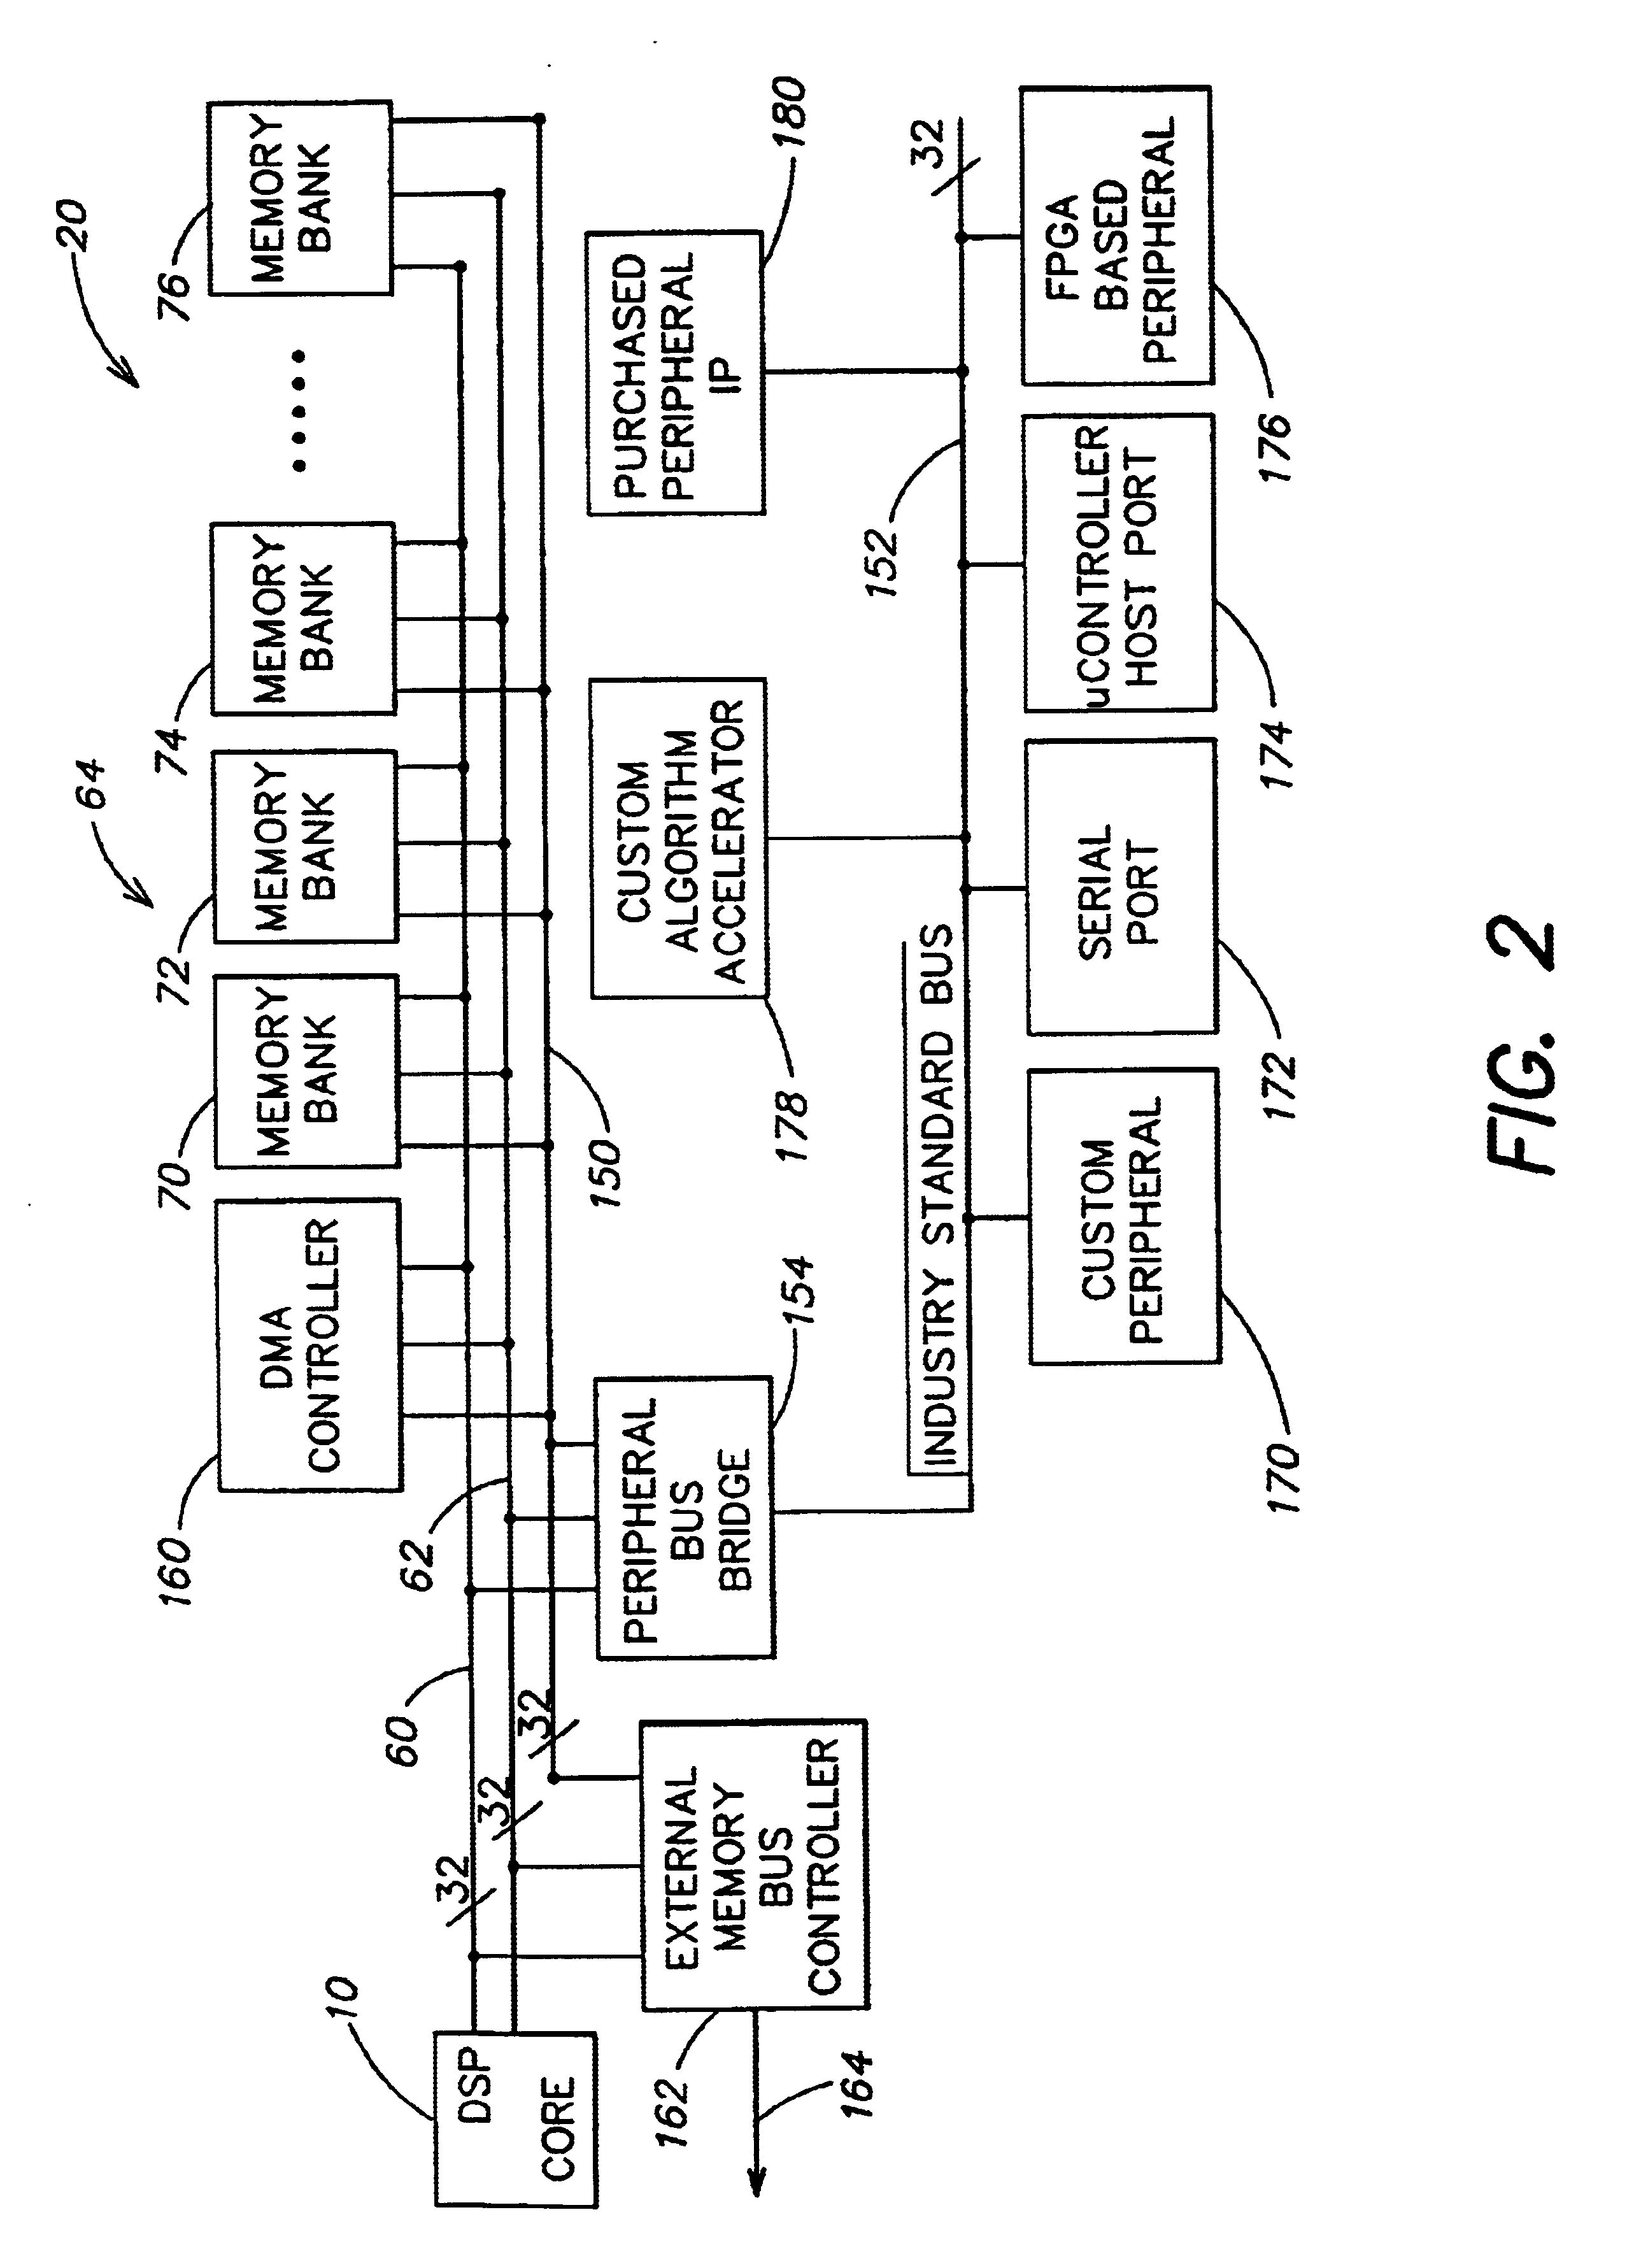 Digital signal processor computation core with pipeline having memory access stages and multiply accumulate stages positioned for efficient operation